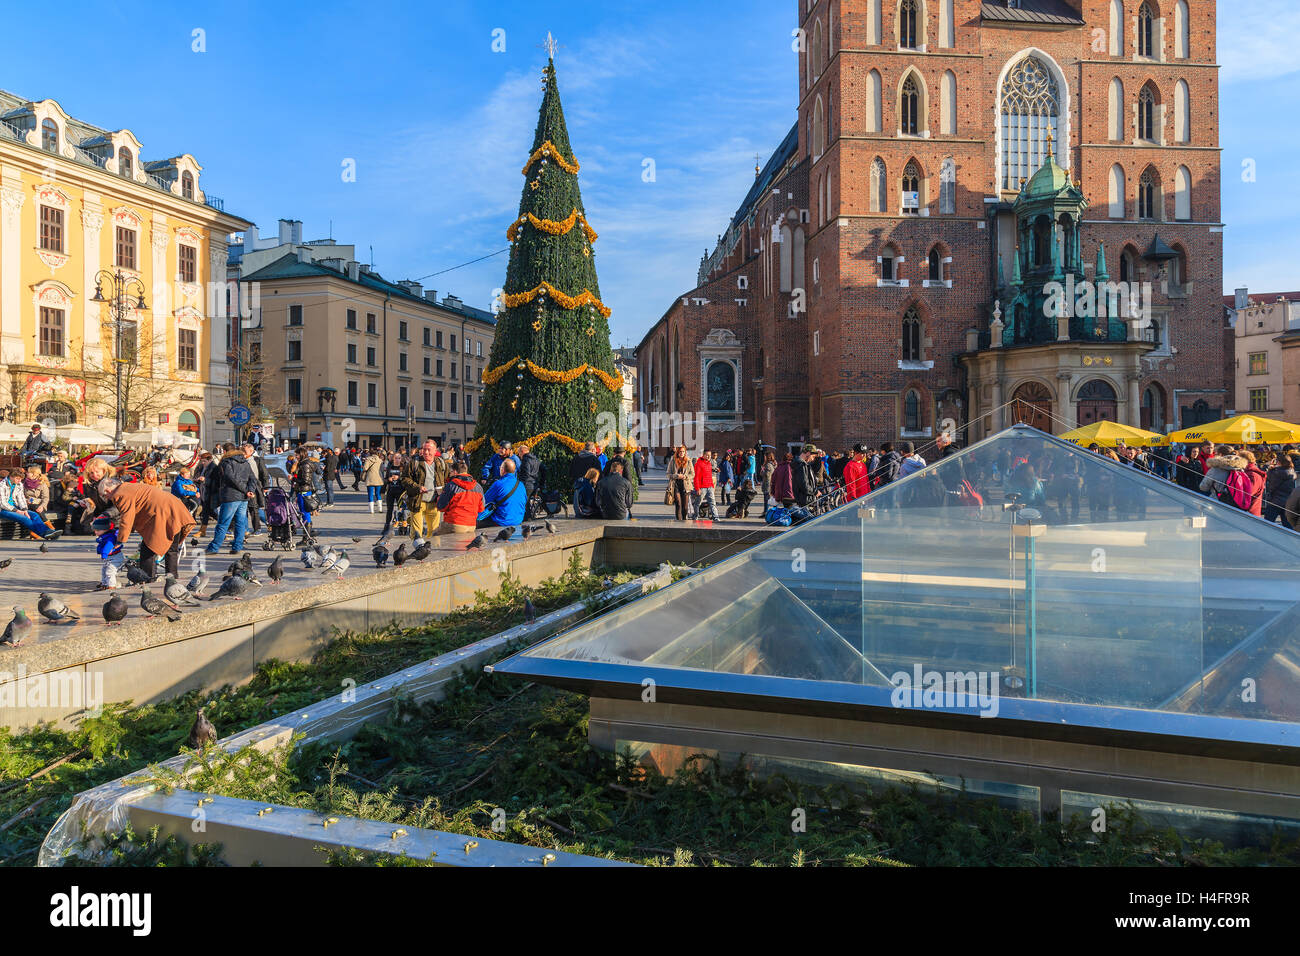 KRAKOW, POLAND - DEC 13, 2014: Christmas tree on main market square of Krakow with Mariacki church in background. Every year a Christmas fair take places in historic city of Krakow, Poland. Stock Photo